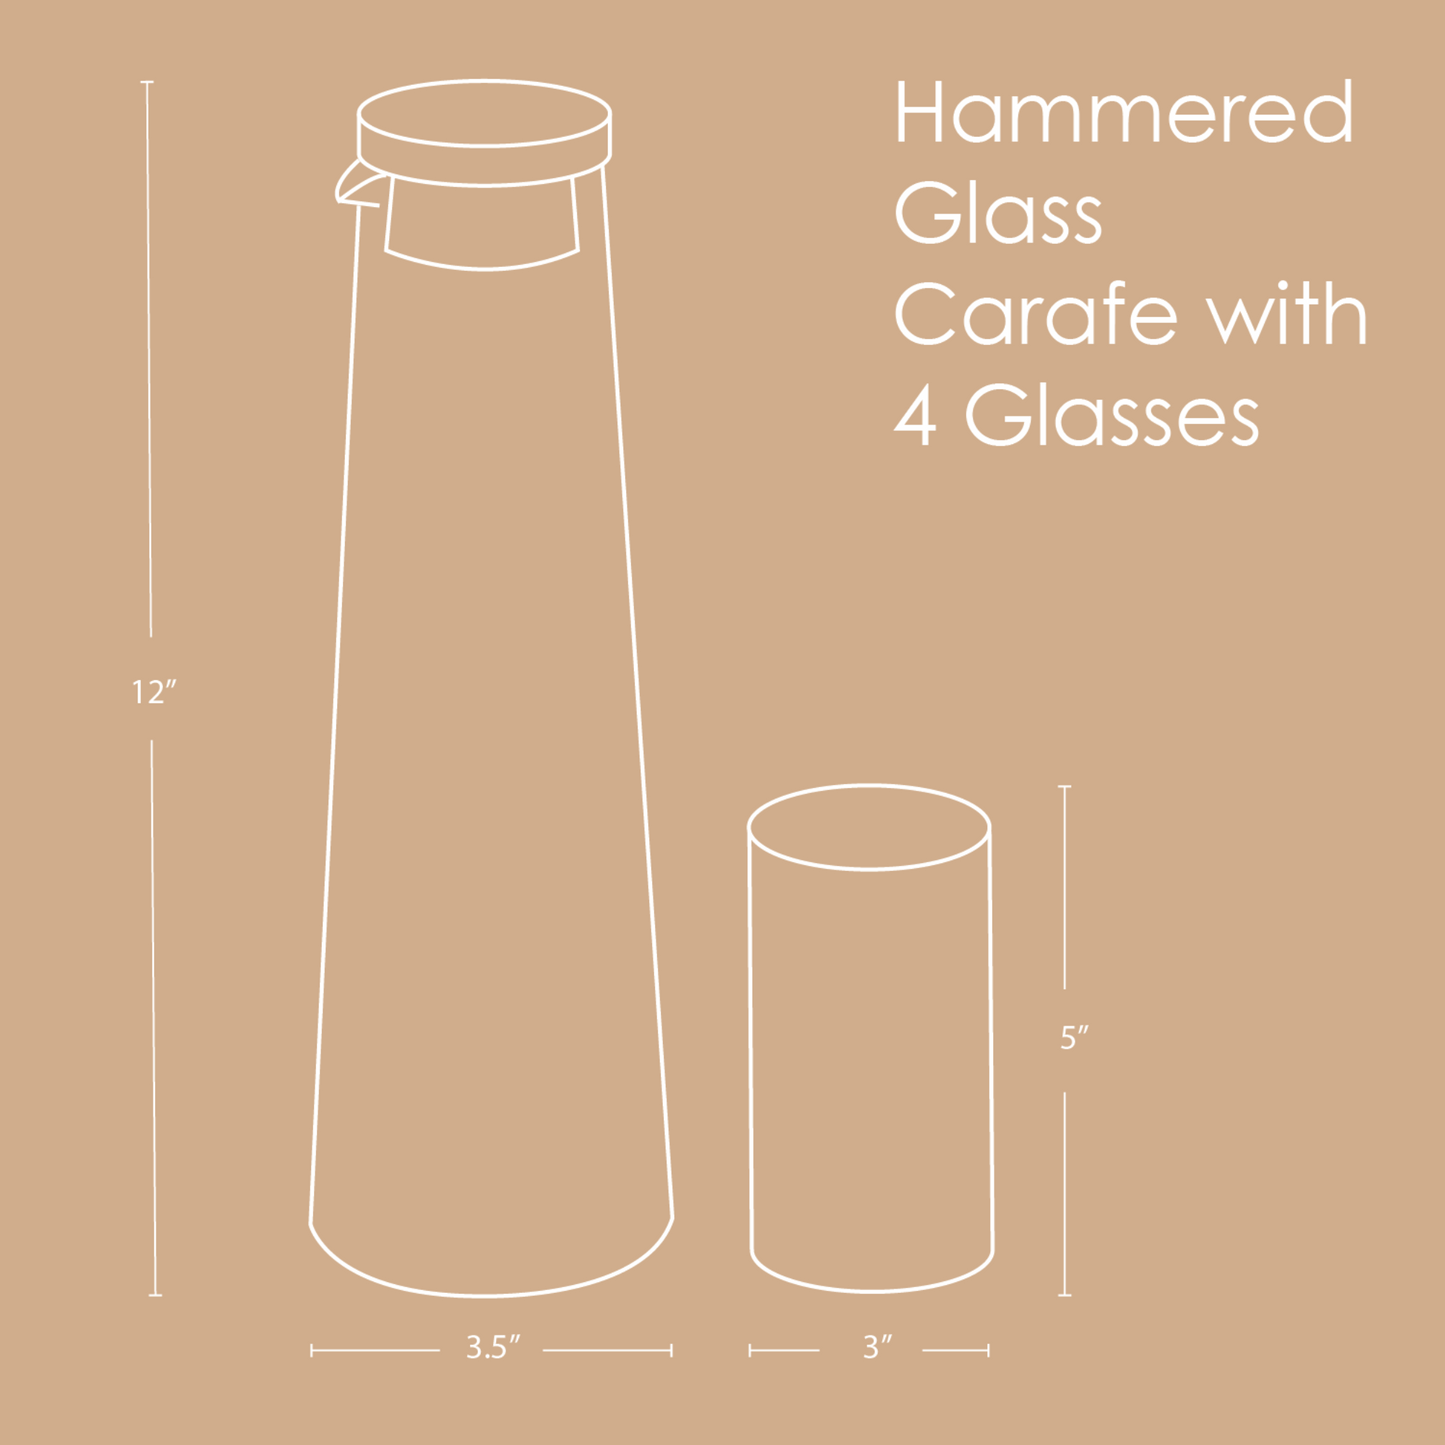 HAMMERED GLASS CARAFE WITH 4 GLASSES